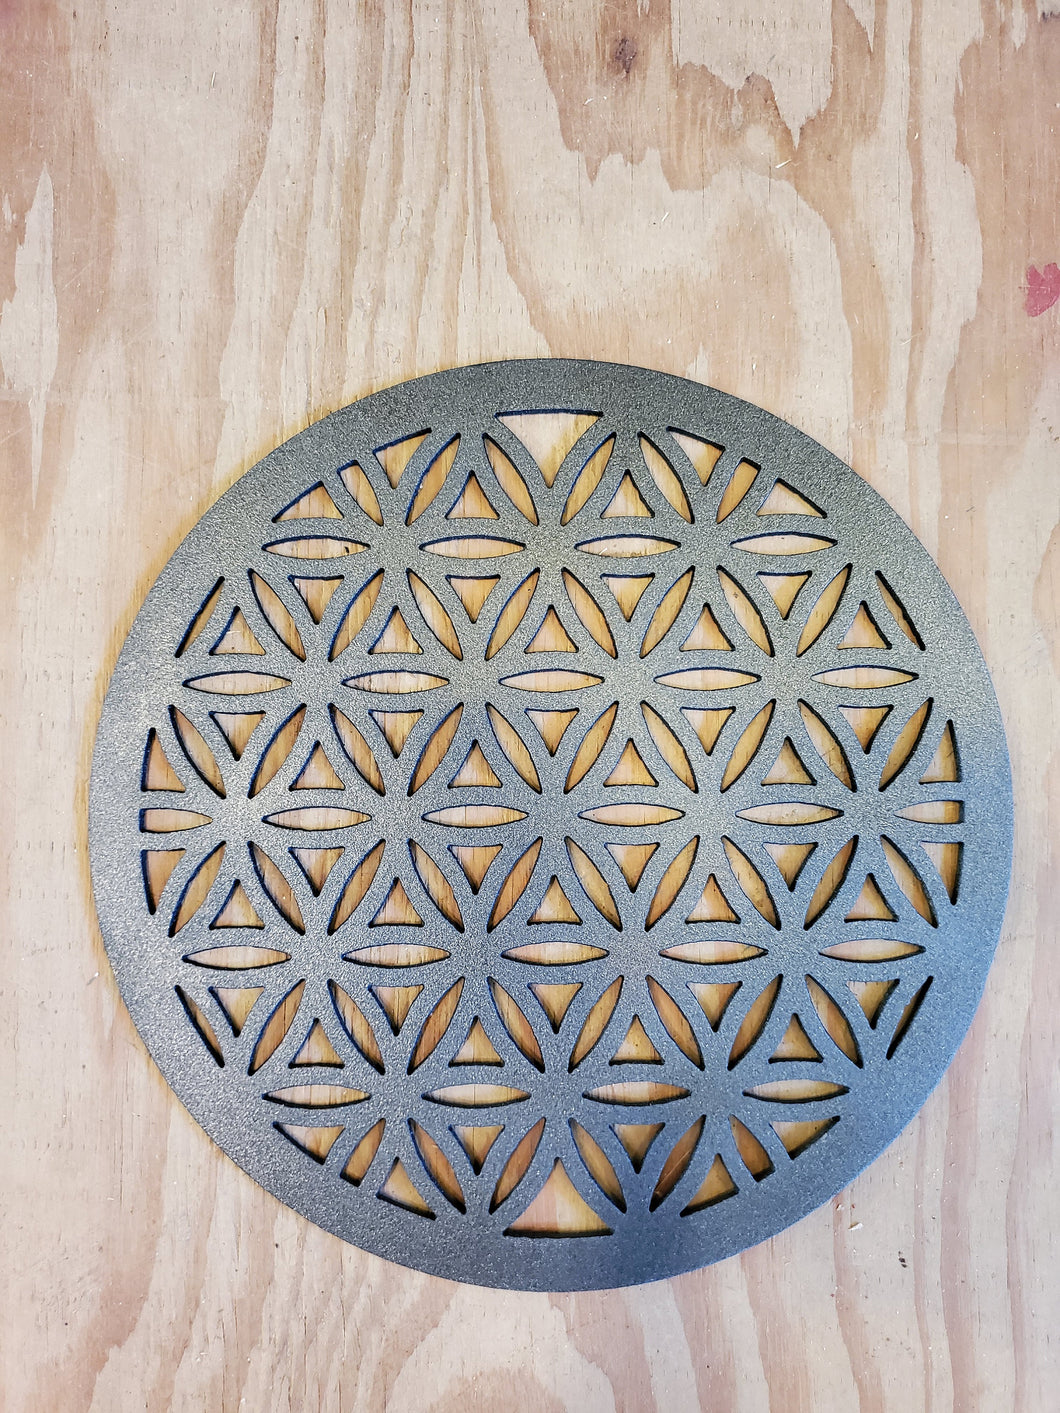 Flower of Life, steel 10 or 14ga thickness available